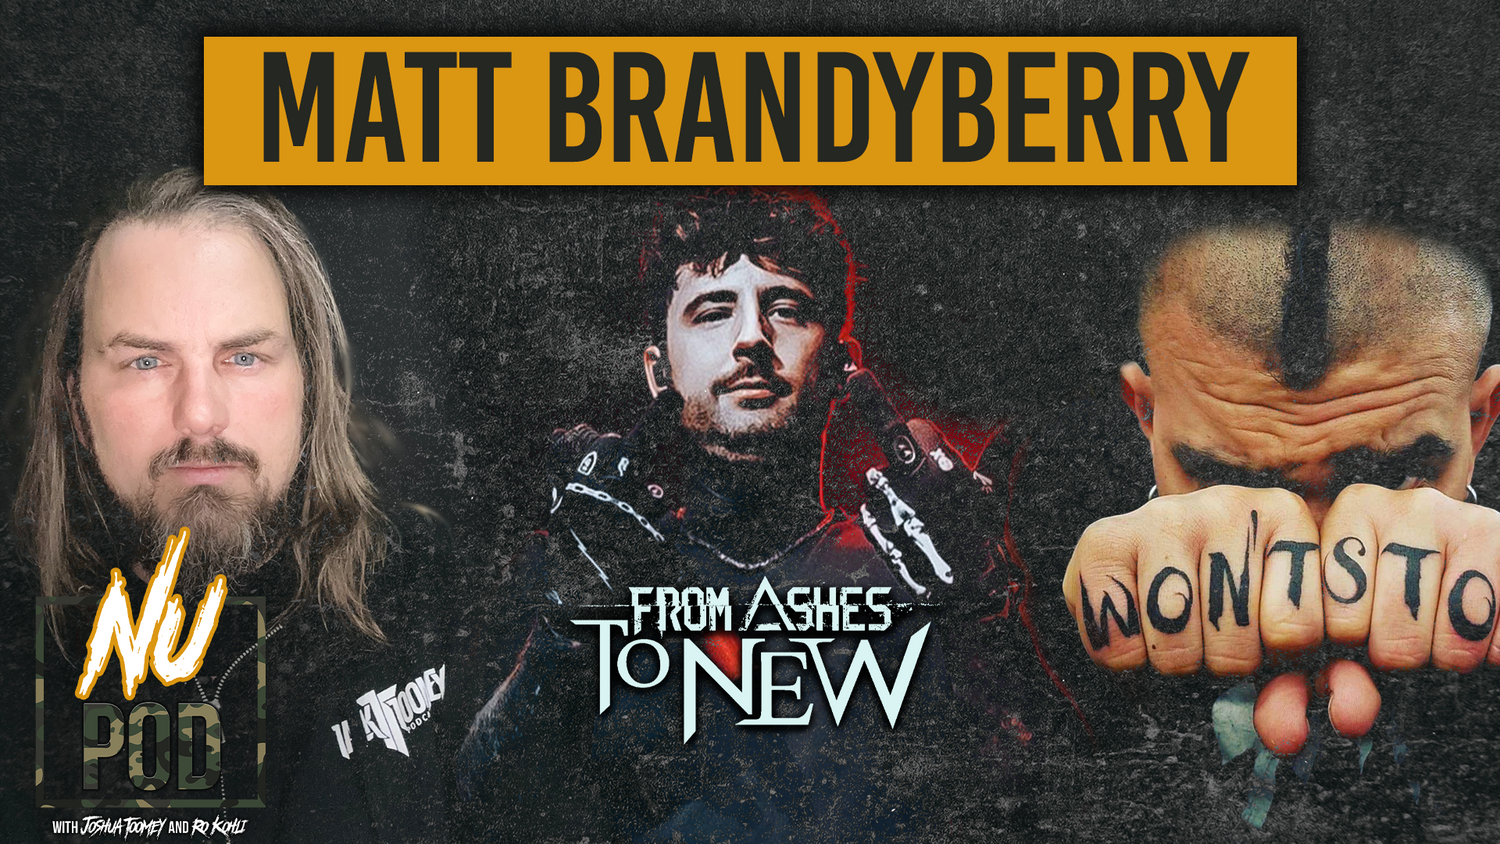 NU POD | MATT BRANDYBERRY (FROM ASHES TO NEW) “THE ‘HATE ME TOO’ VIDEO IS SHUTDOWN IN MANY COUNTRIES